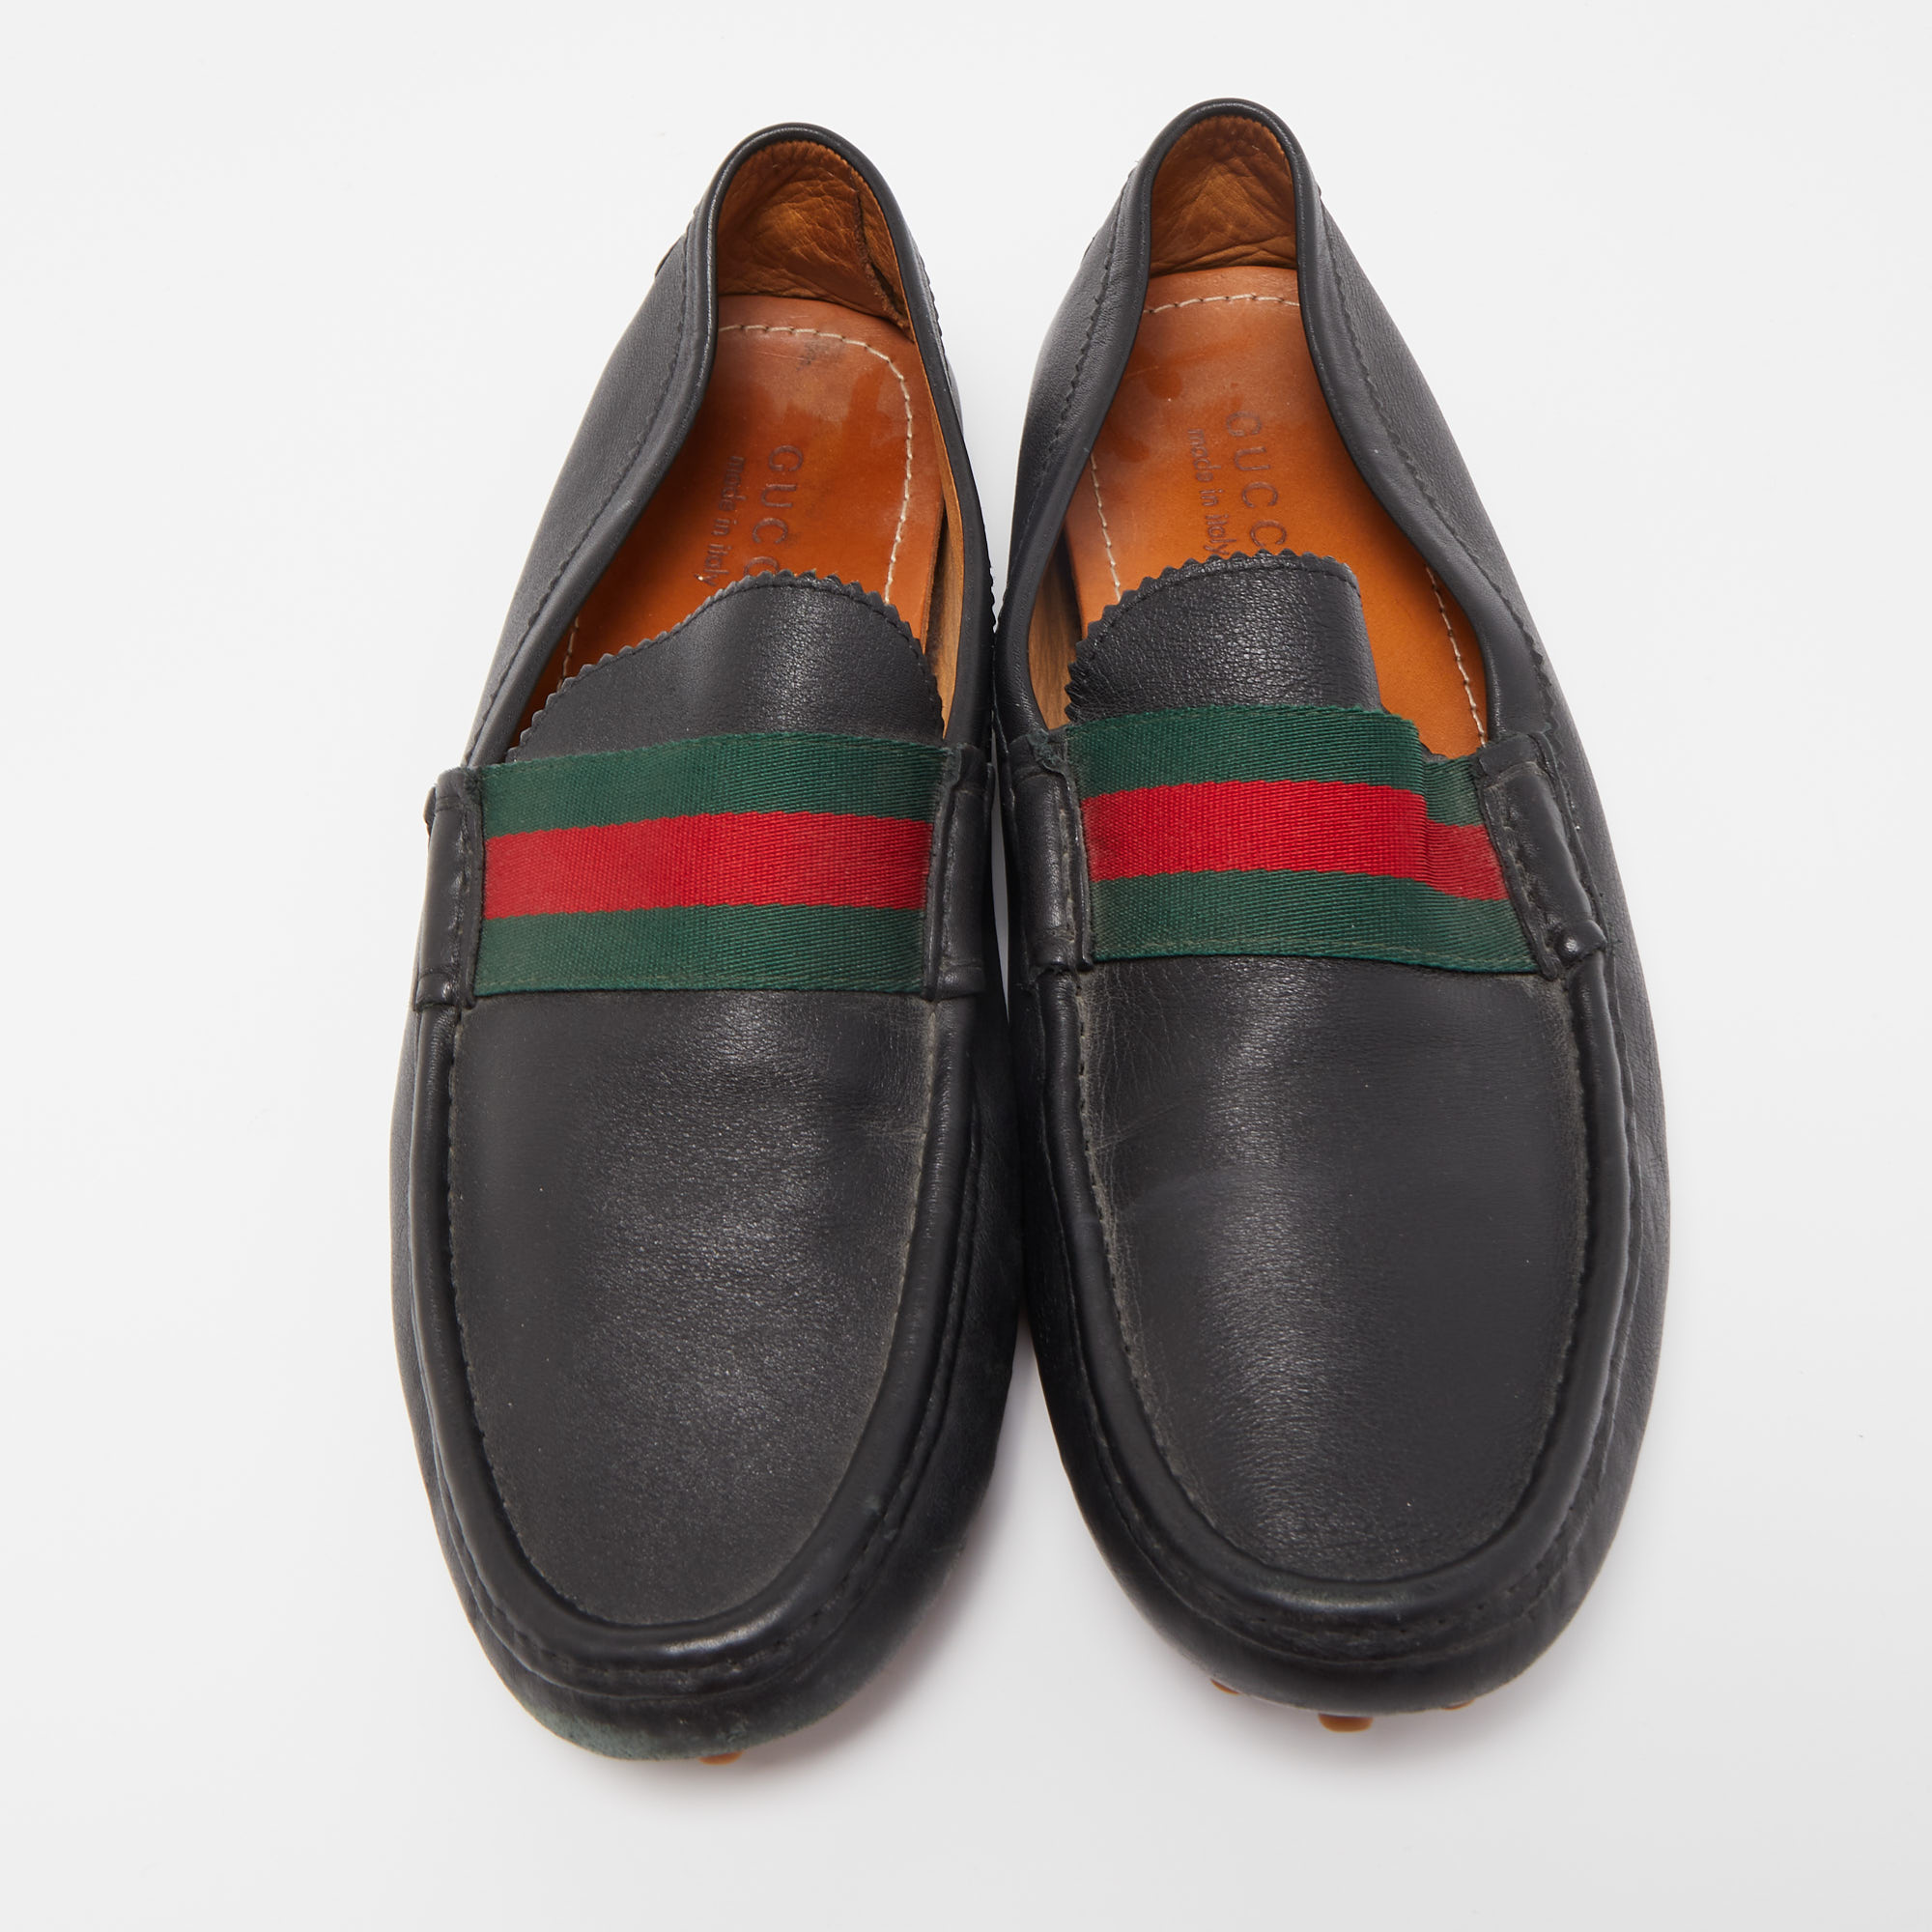 Gucci Black Leather Web Slip On Loafers Size 45